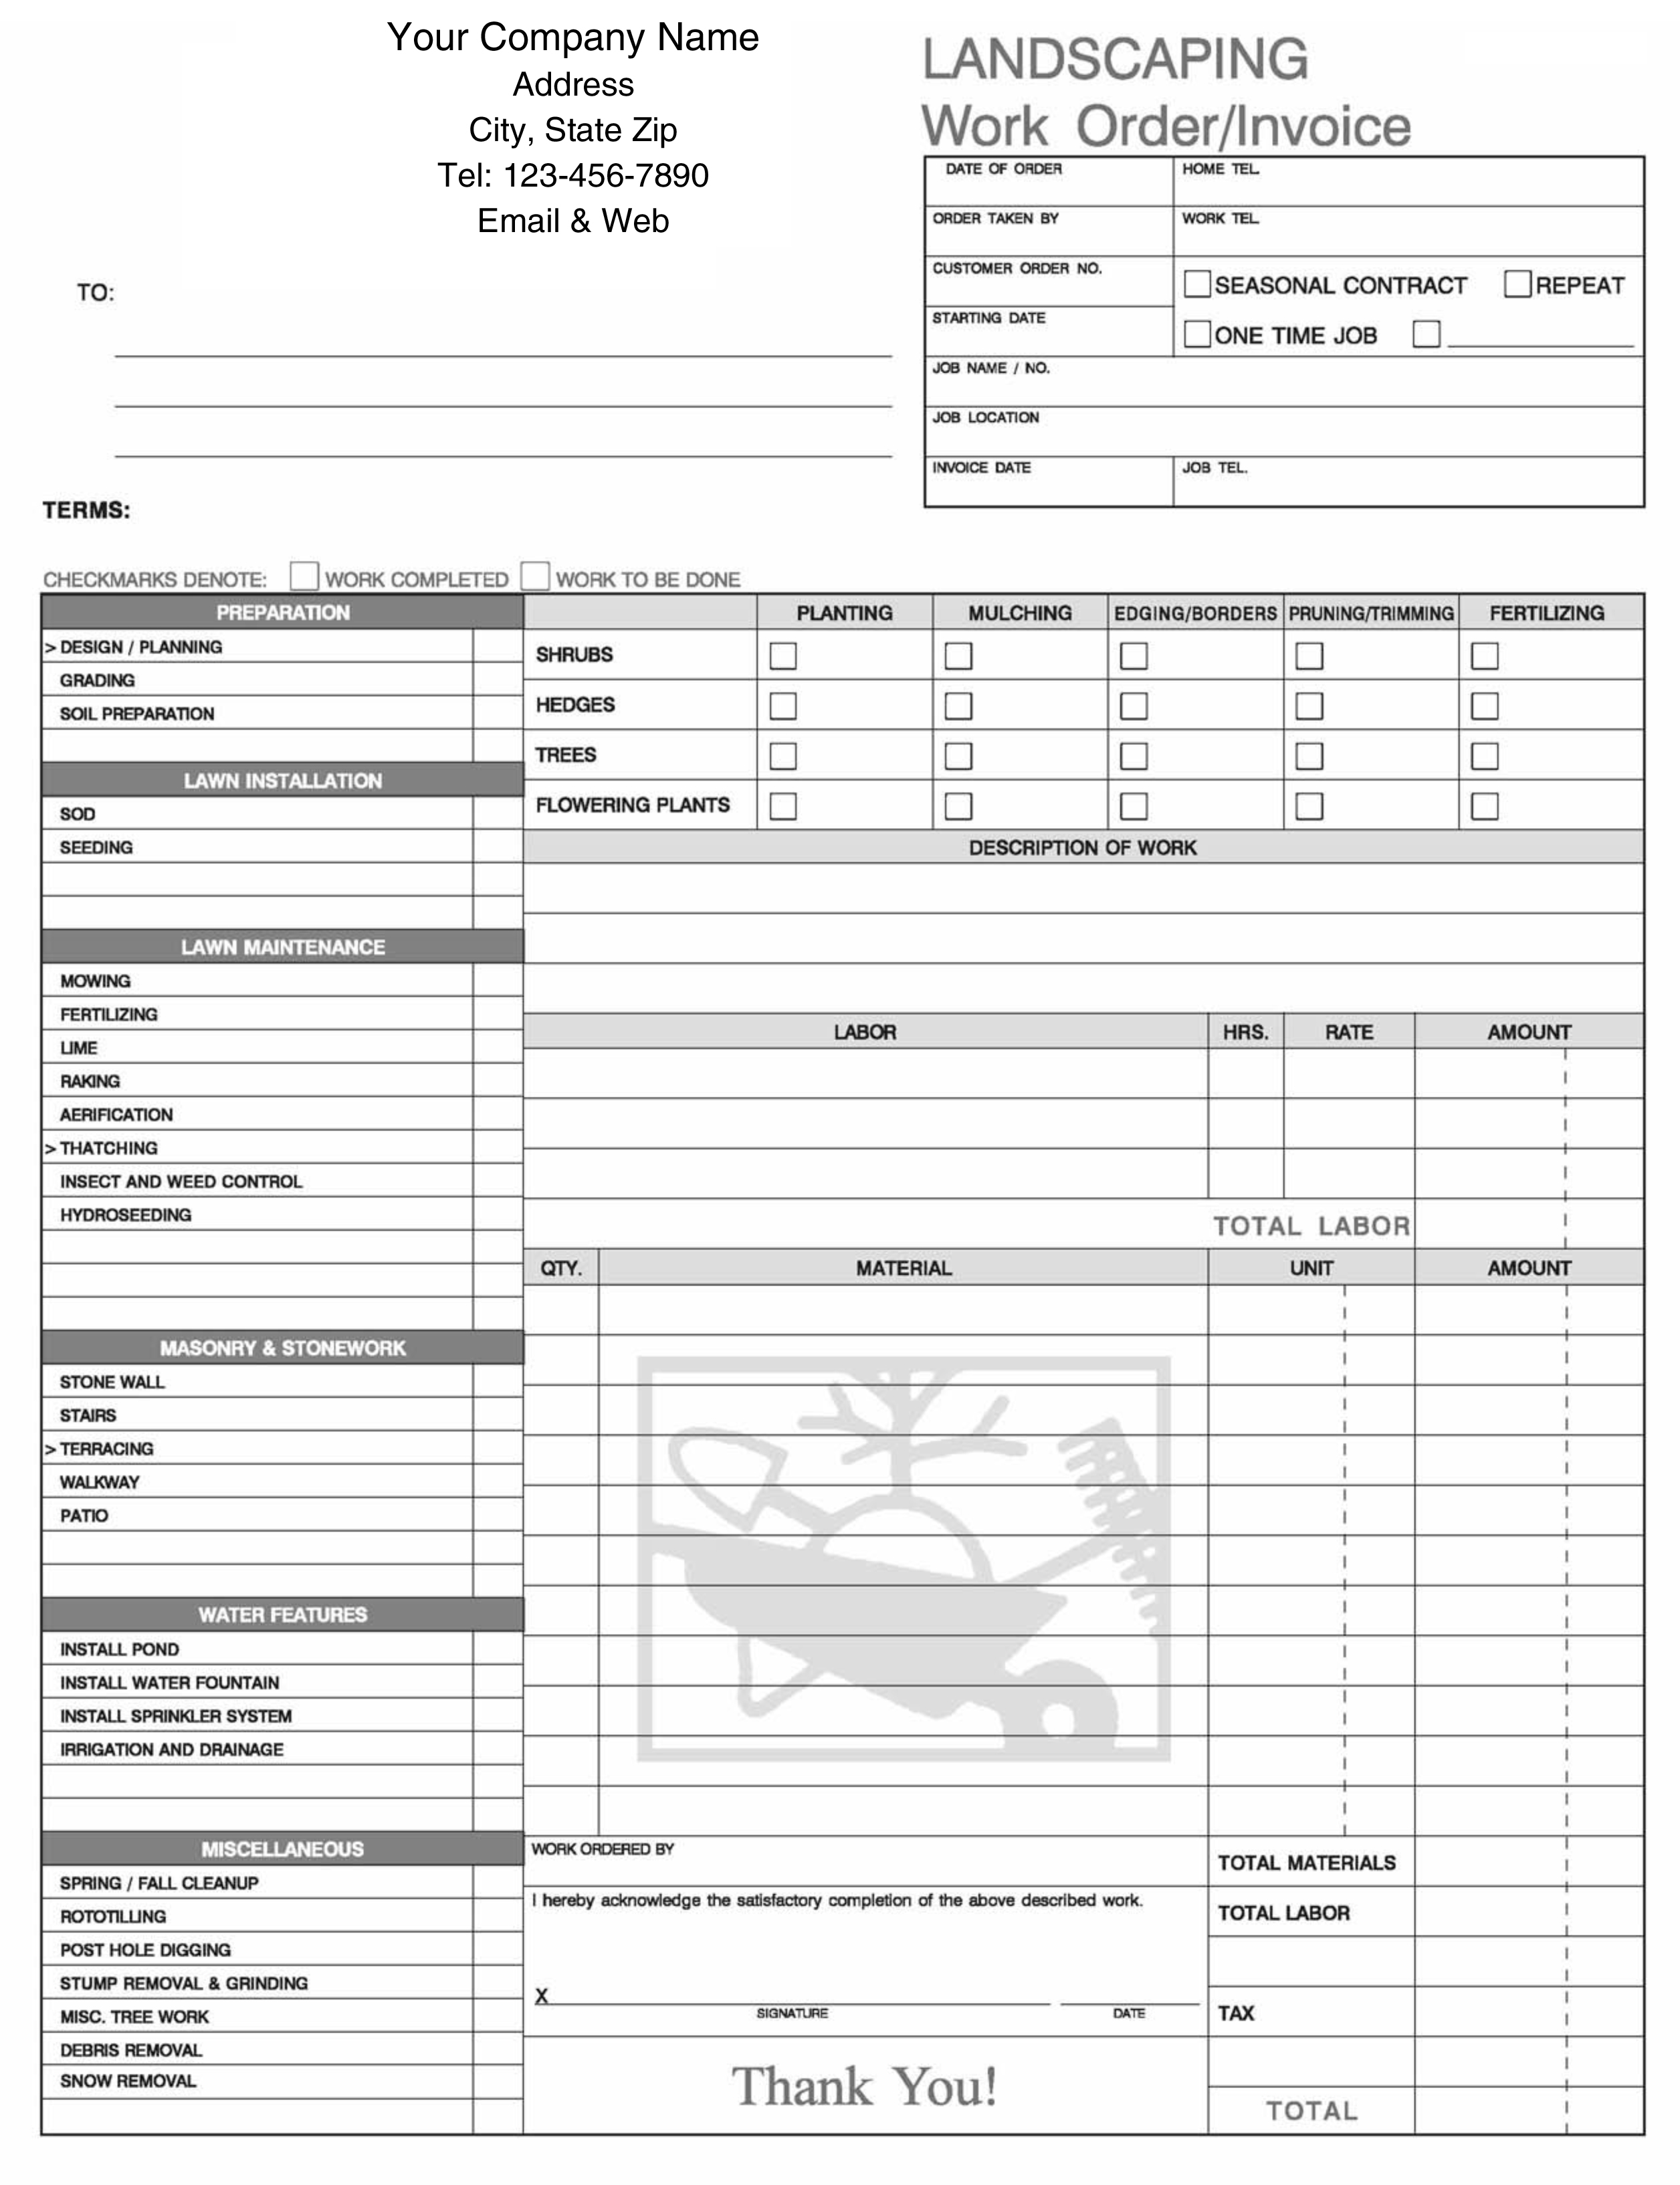 Invoice Template For Excel 2007 Design Landscaping Example 1275 X 